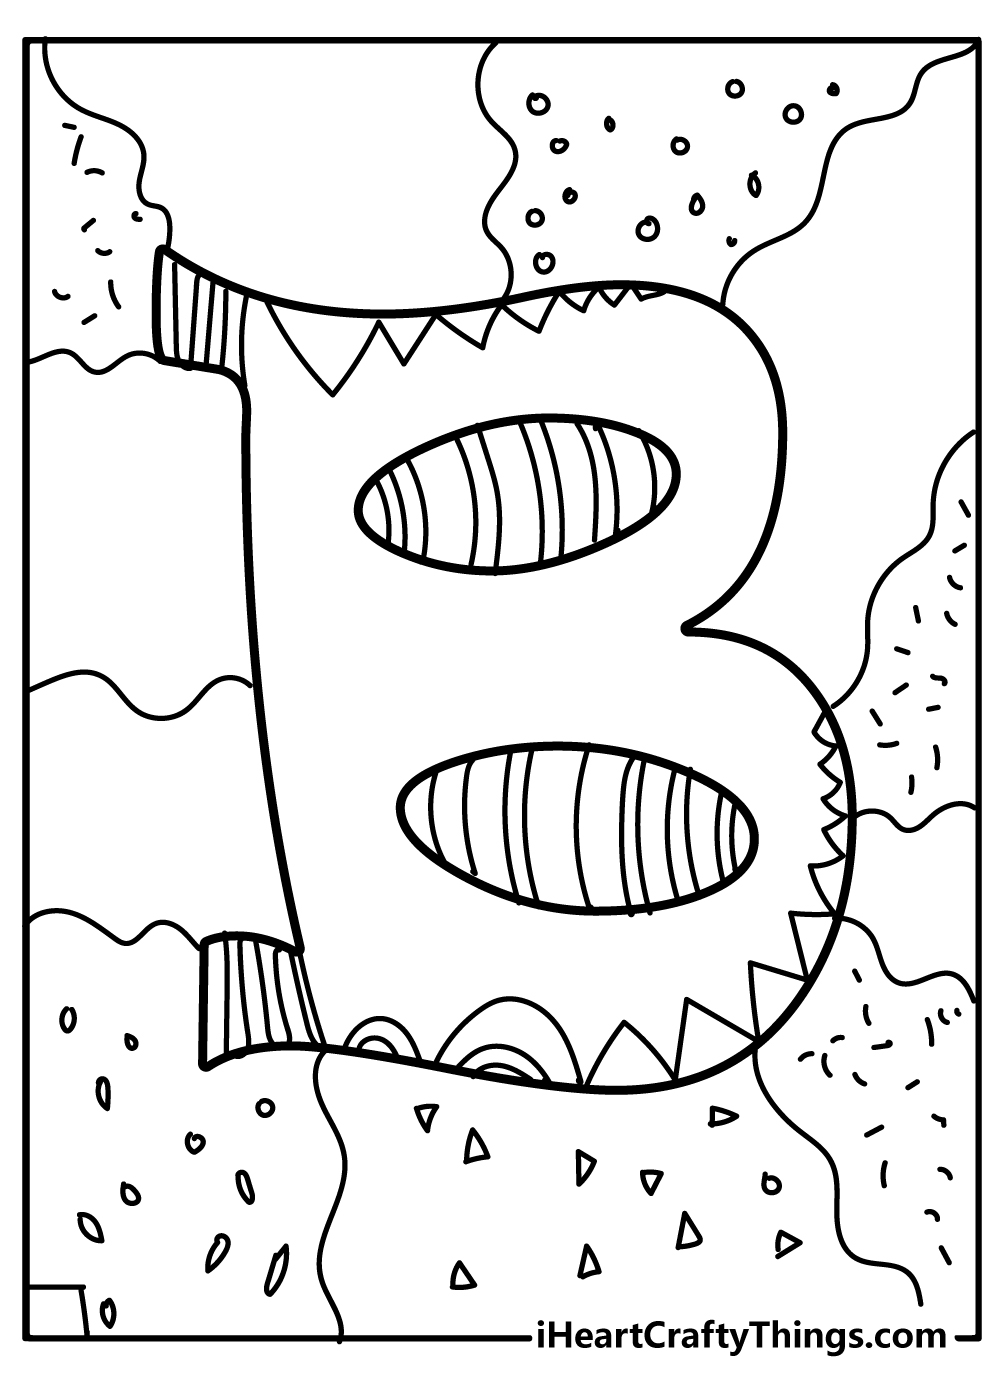 Letter B Coloring Pages for preschoolers free printable